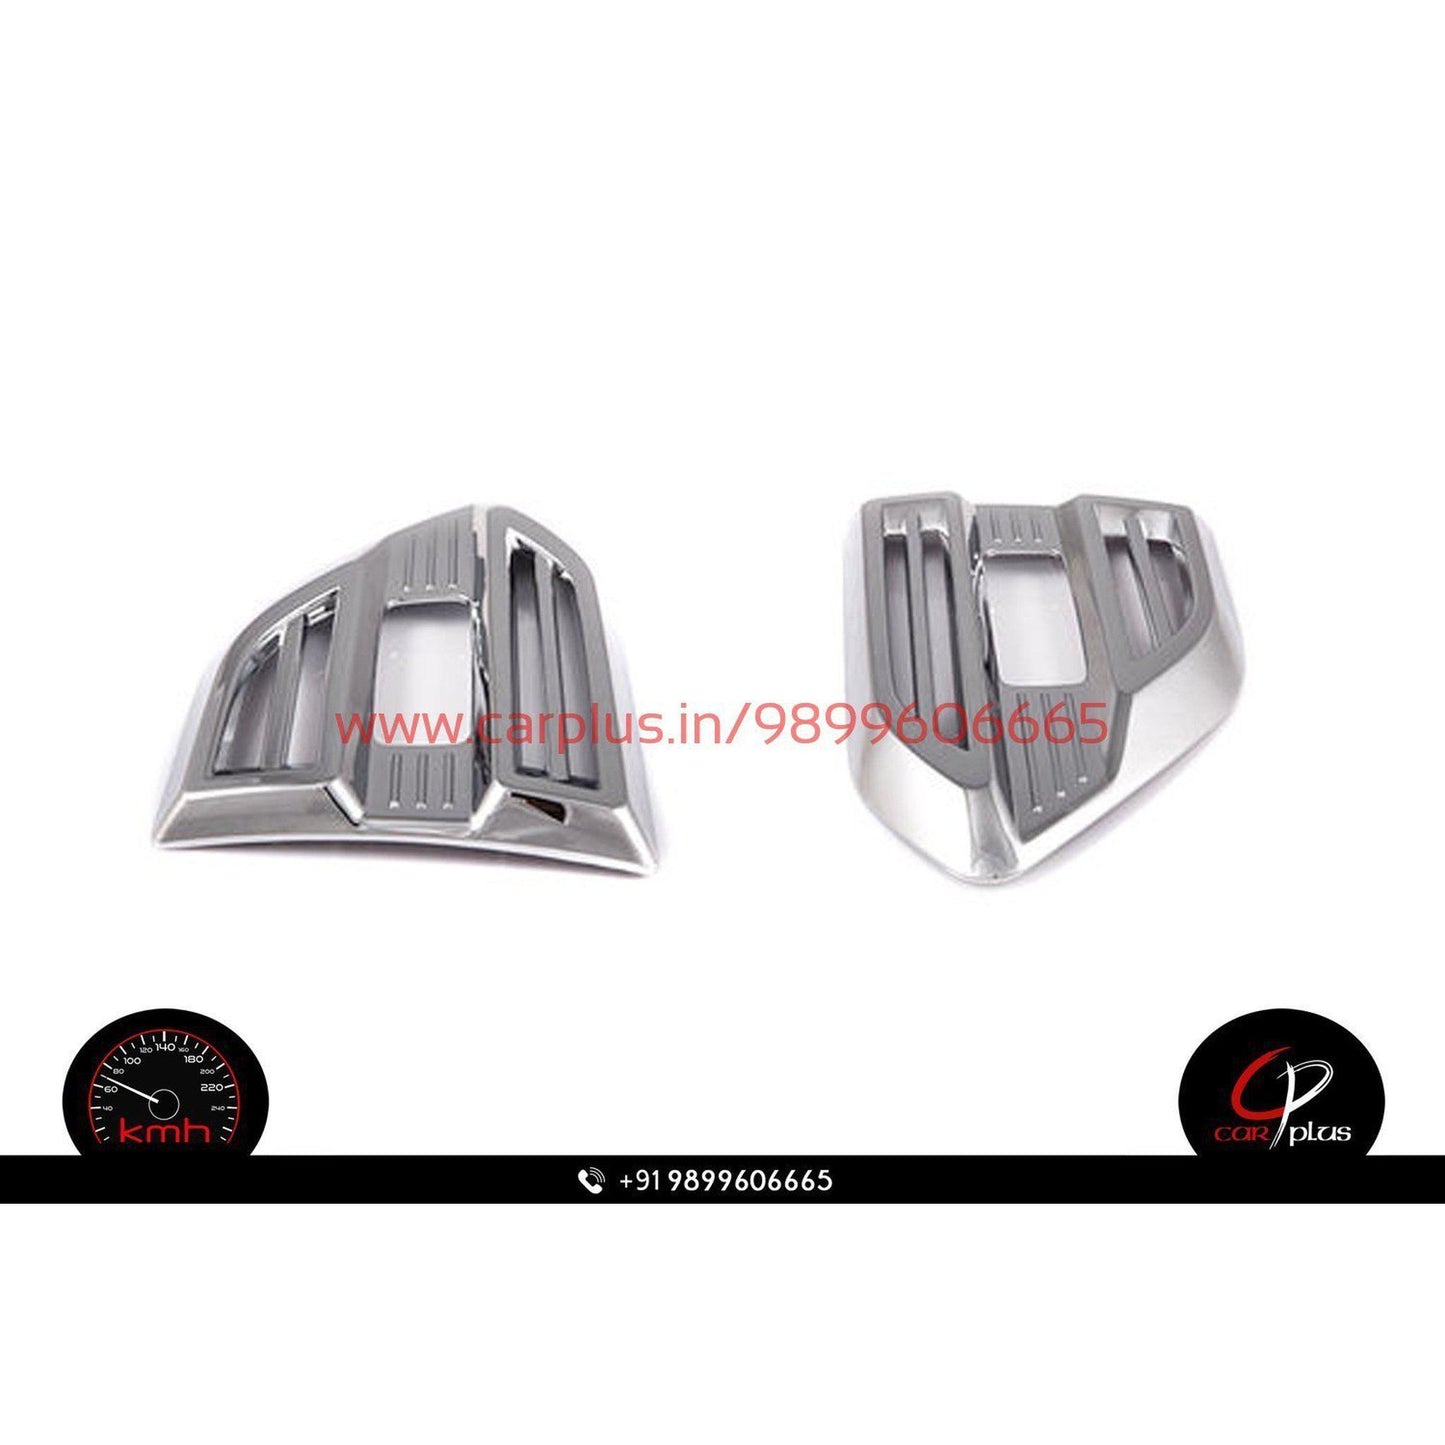 https://cdn.shopify.com/s/files/1/0313/1444/4421/products/KMH-Side-Vent-Cover-Chrome-for-Ford-Endeavour-Set-of-2Pcs-EXTERIOR-CN-LEAGUE_326bcbde-b117-4d3f-a98a-1ab3856cf6c7_1445x.jpg?v=1631750162